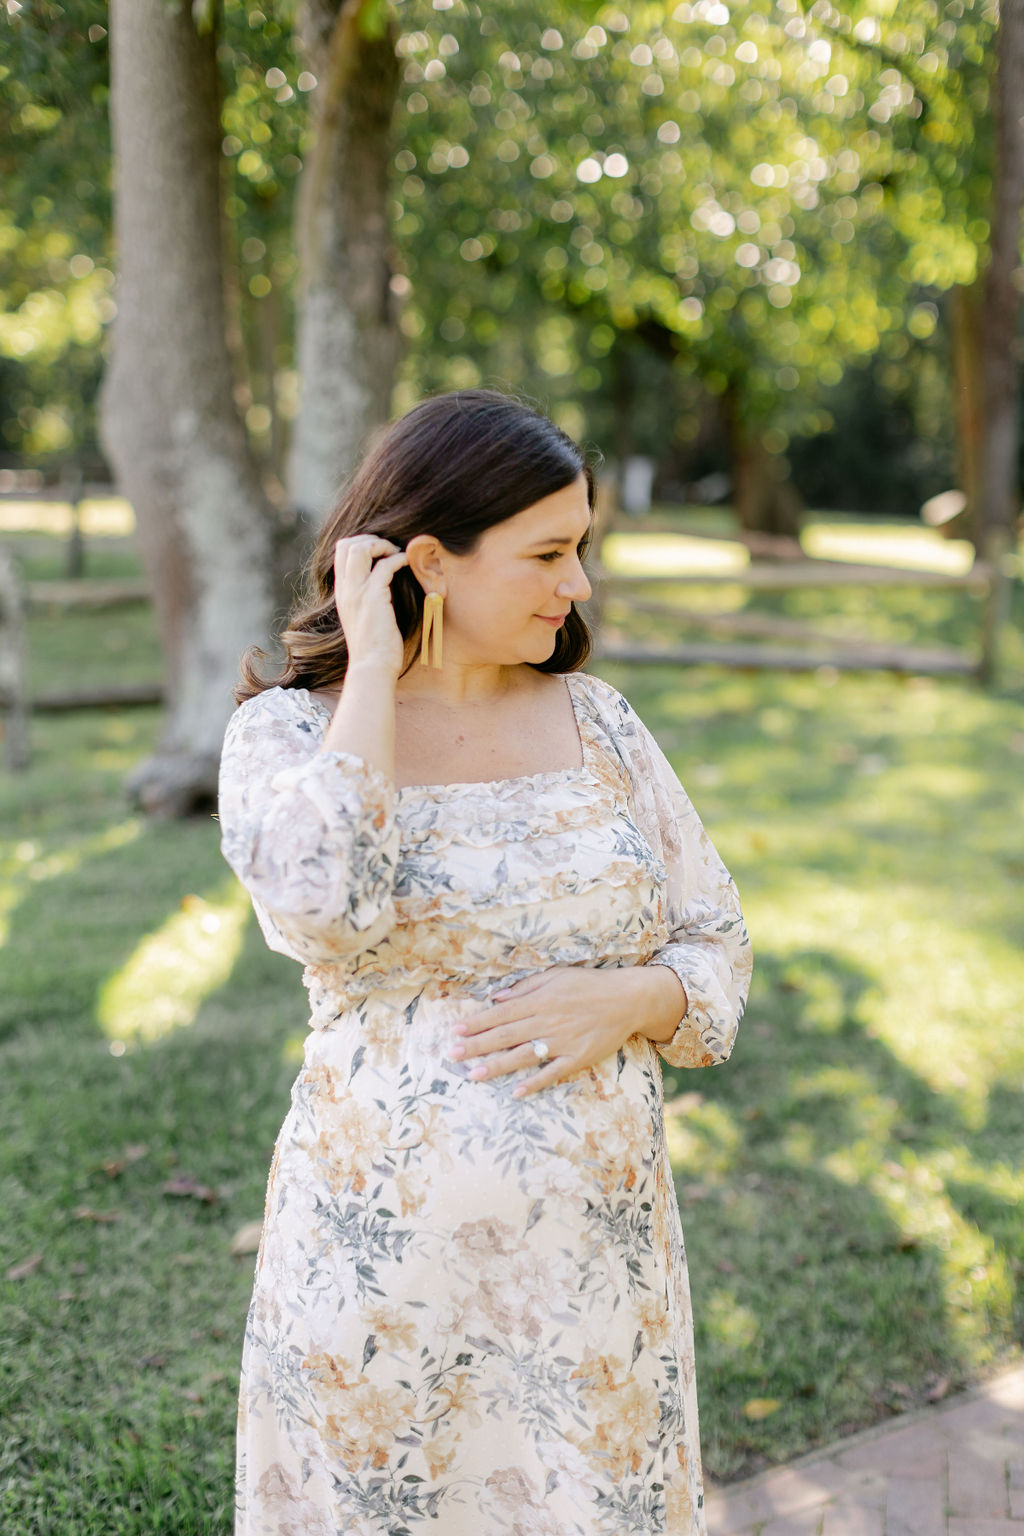 A mother to be in a yellow floral dress brushes her hair behind her ear while standing in a park after visiting yoga studios charleston sc